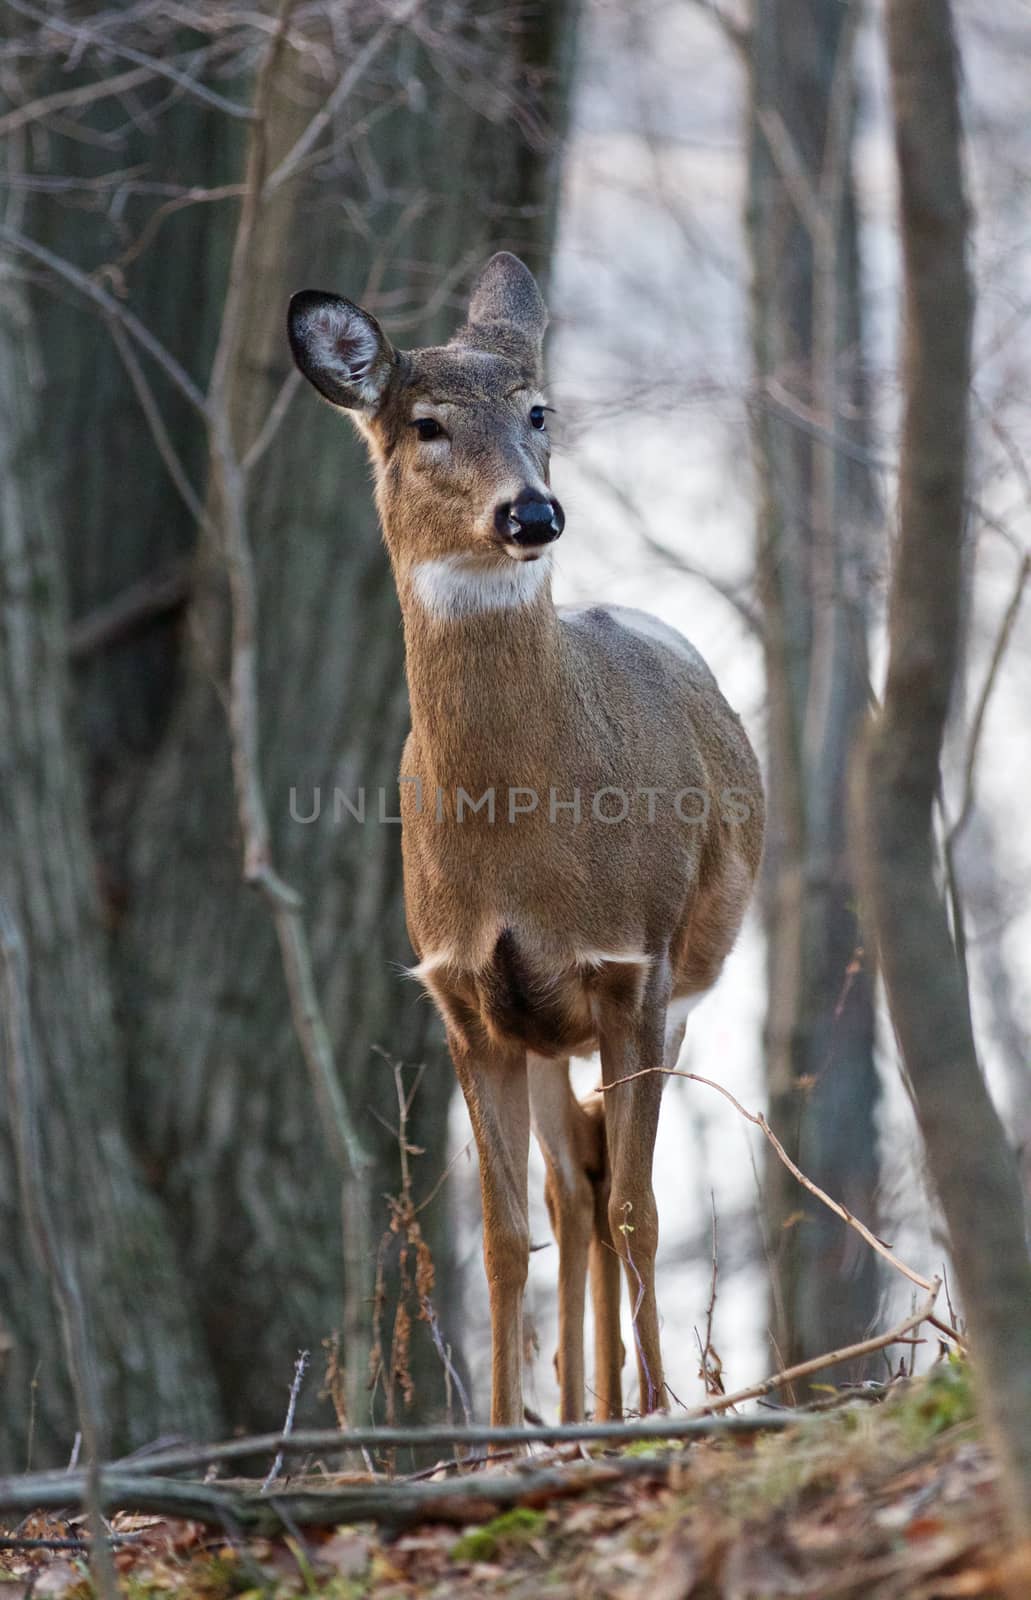 Photo of the unsure young deer in the forest